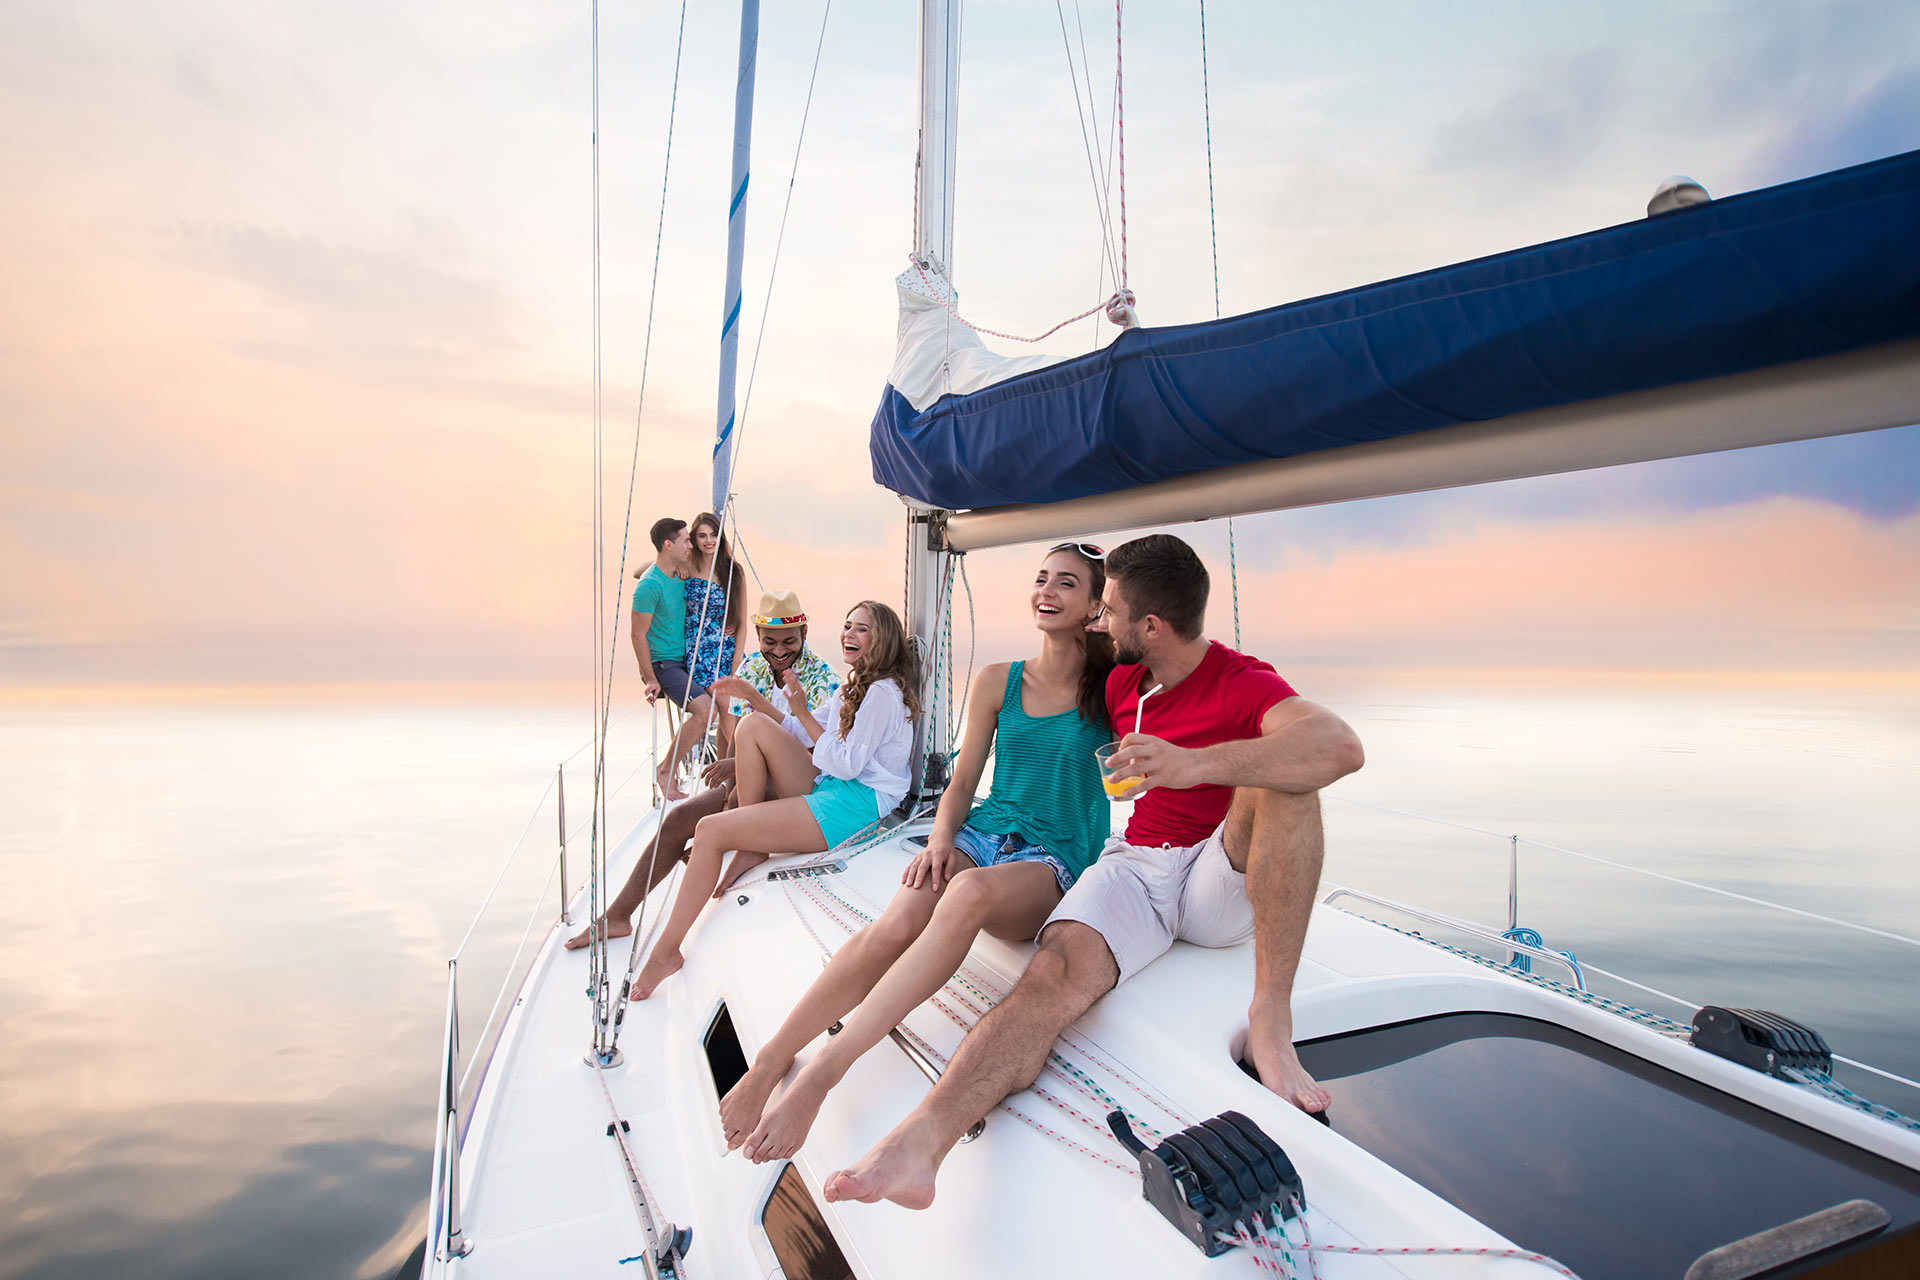 young-people-sitting-on-yacht-barcopolo-a-propos